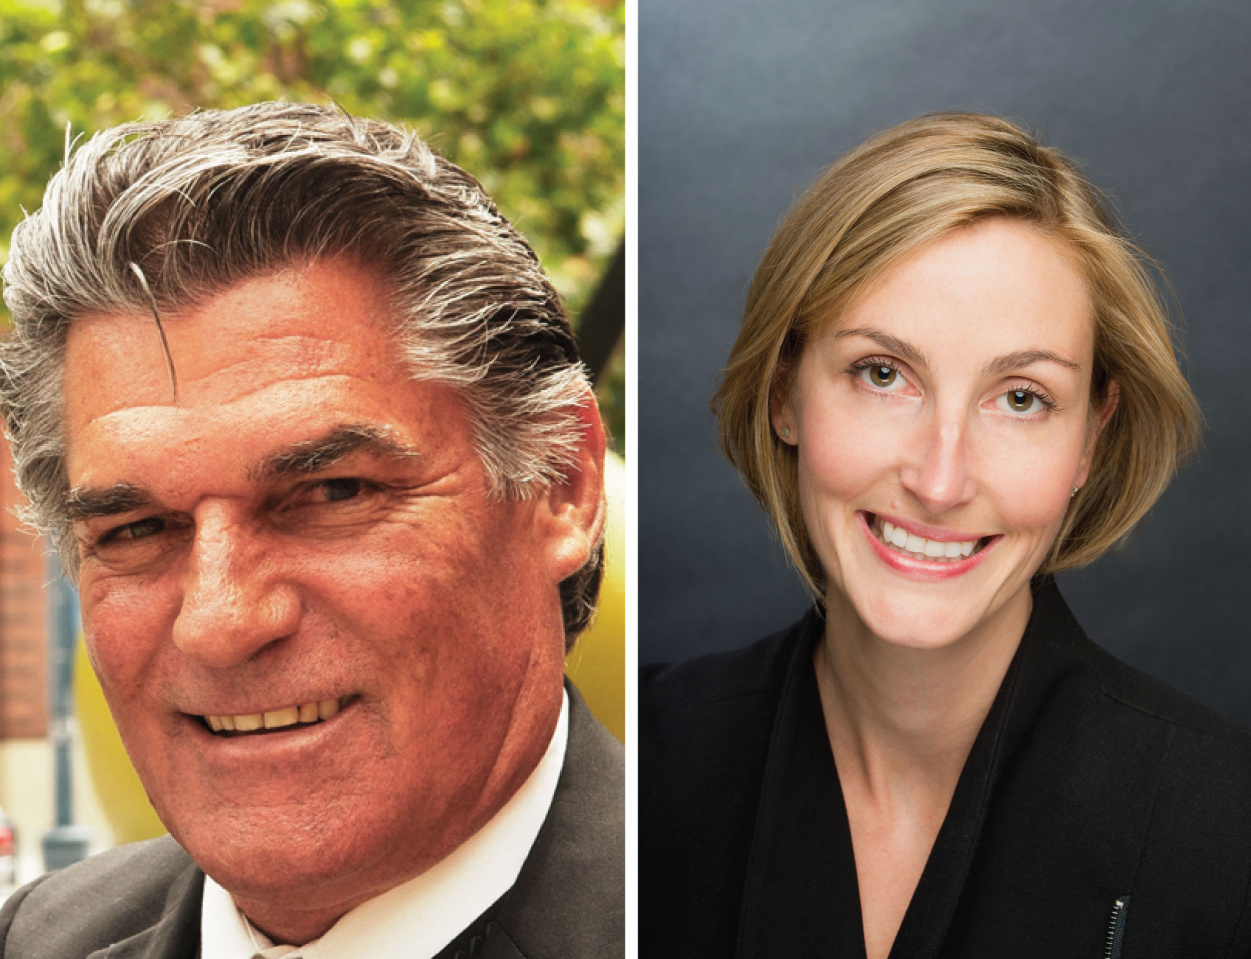 Zephyr Real Estate’s Third Quarter Sales Awards Winners (San Francisco): Gary Tribulato and Isabelle Grotte